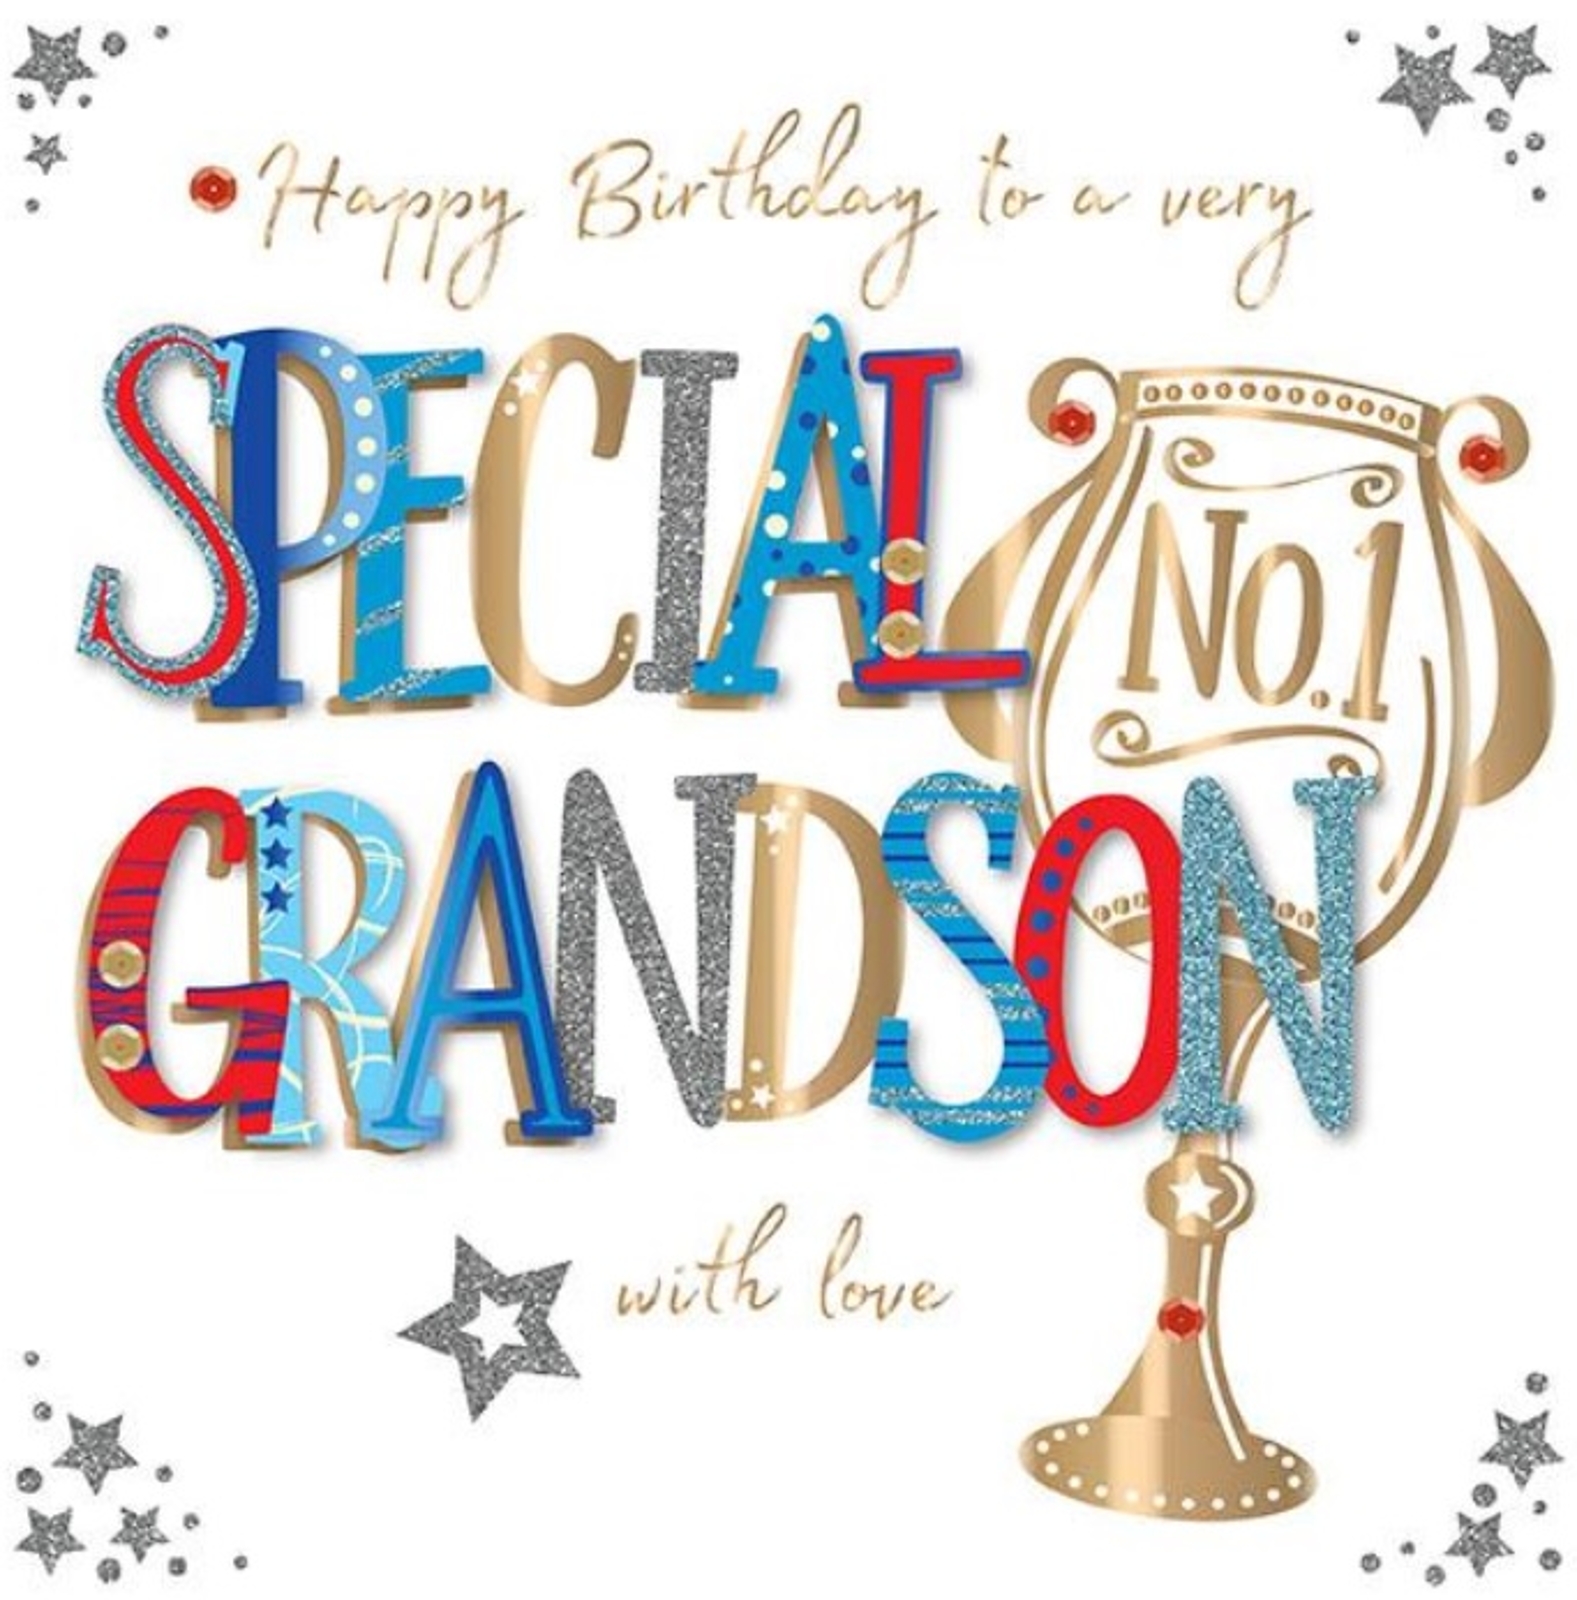 8x8 Large Talking Pictures Special Grandson Birthday Card Luxury ...